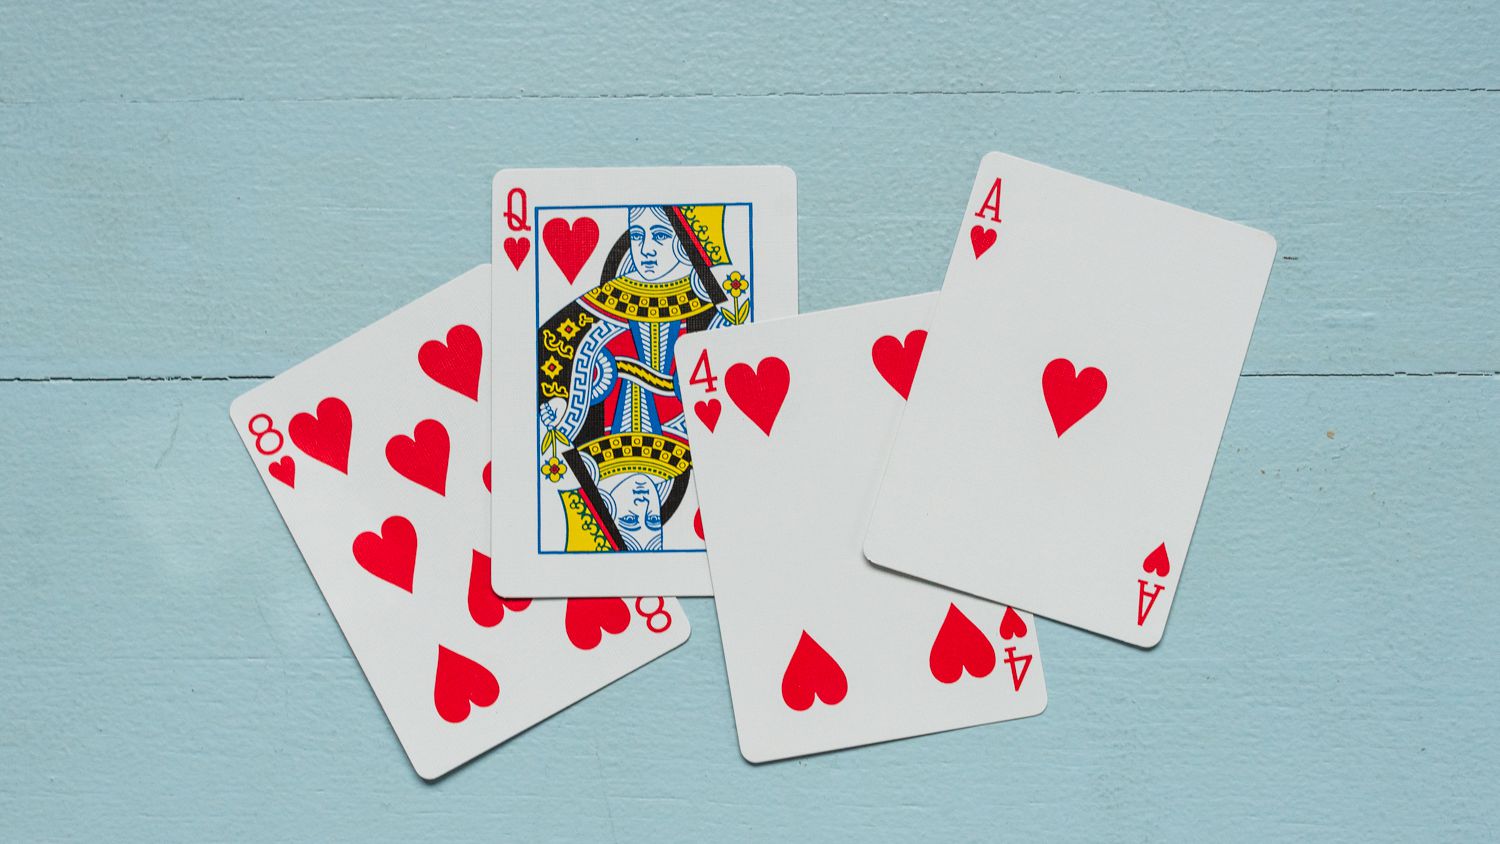 play card hearts games online